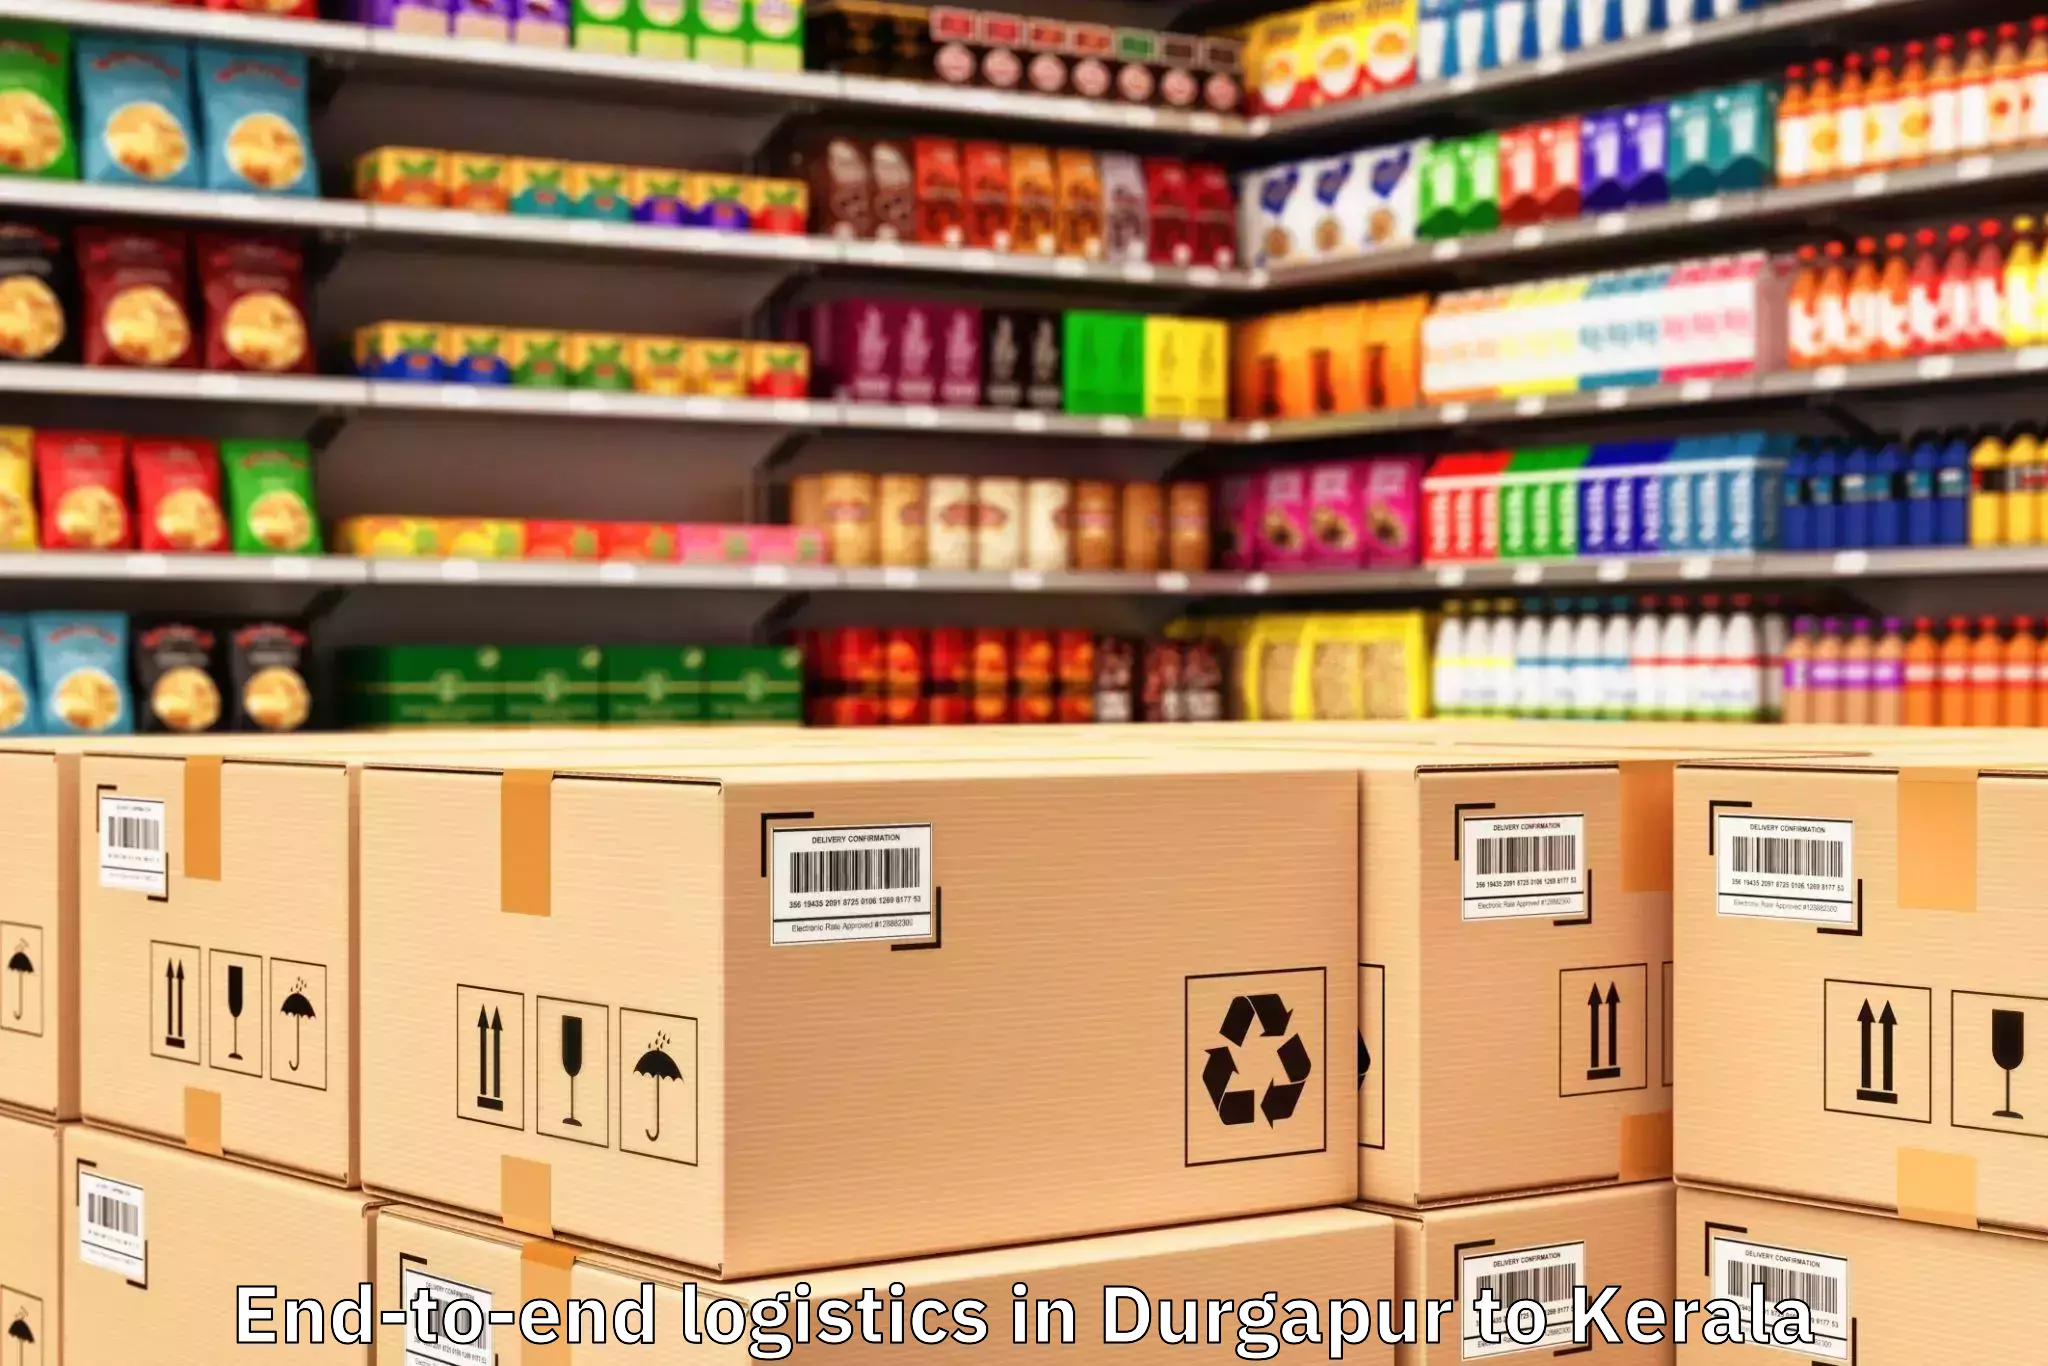 Top Durgapur to Sultan Bathery End To End Logistics Available